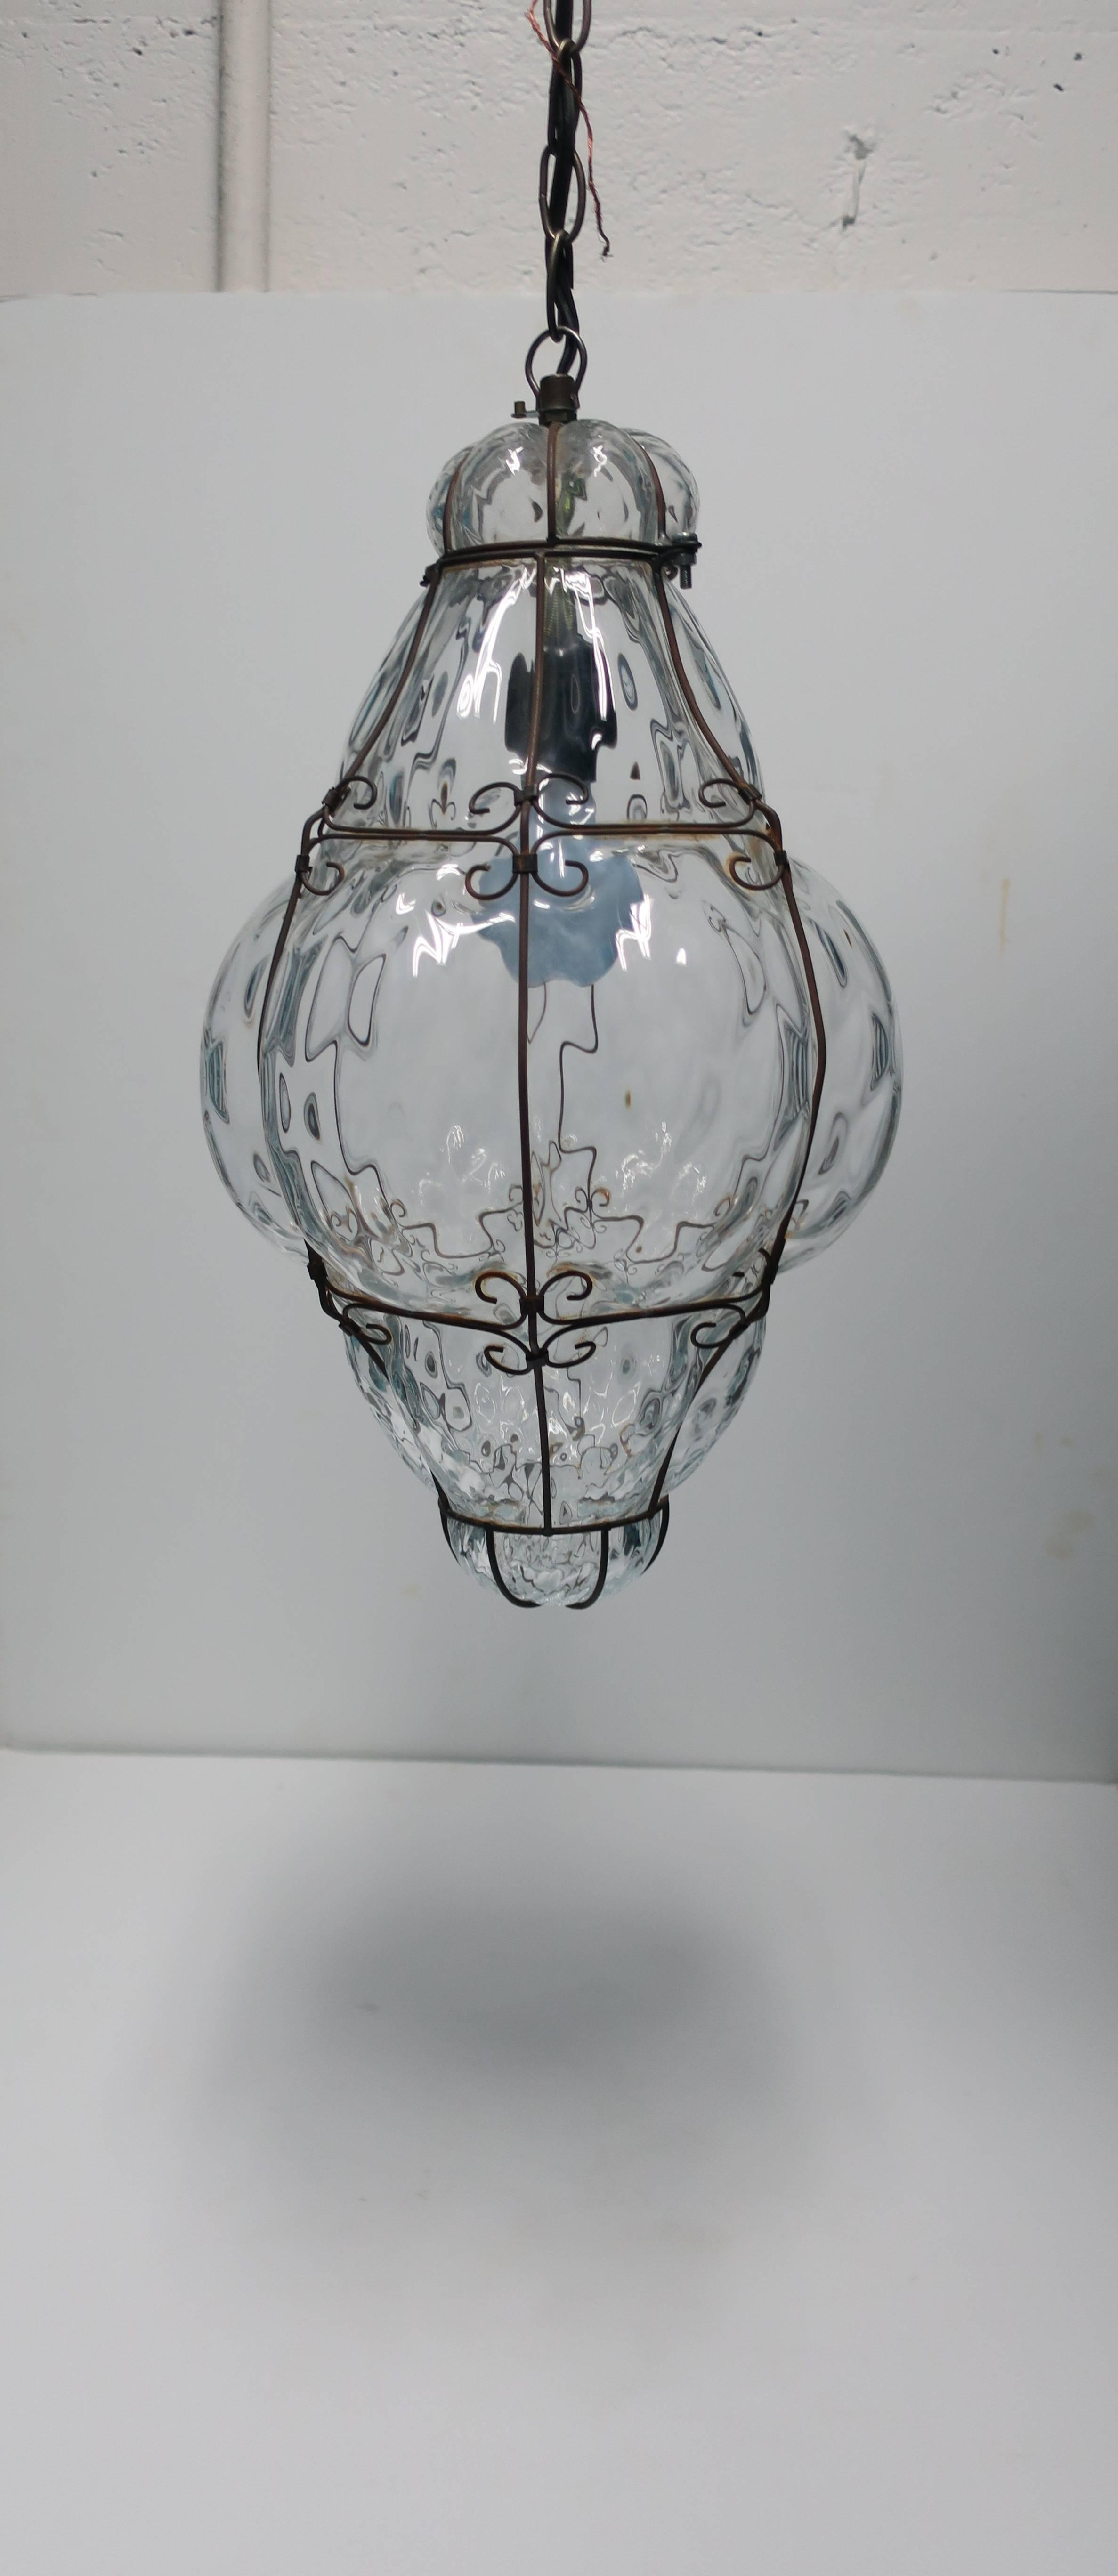 A relatively large, clear, Italian one lamp/bulb lantern pendant hand-blown glass light embraced by decorative metal, Italy, circa 1950s, Italy. In working order. 

Measurements include: 19.5